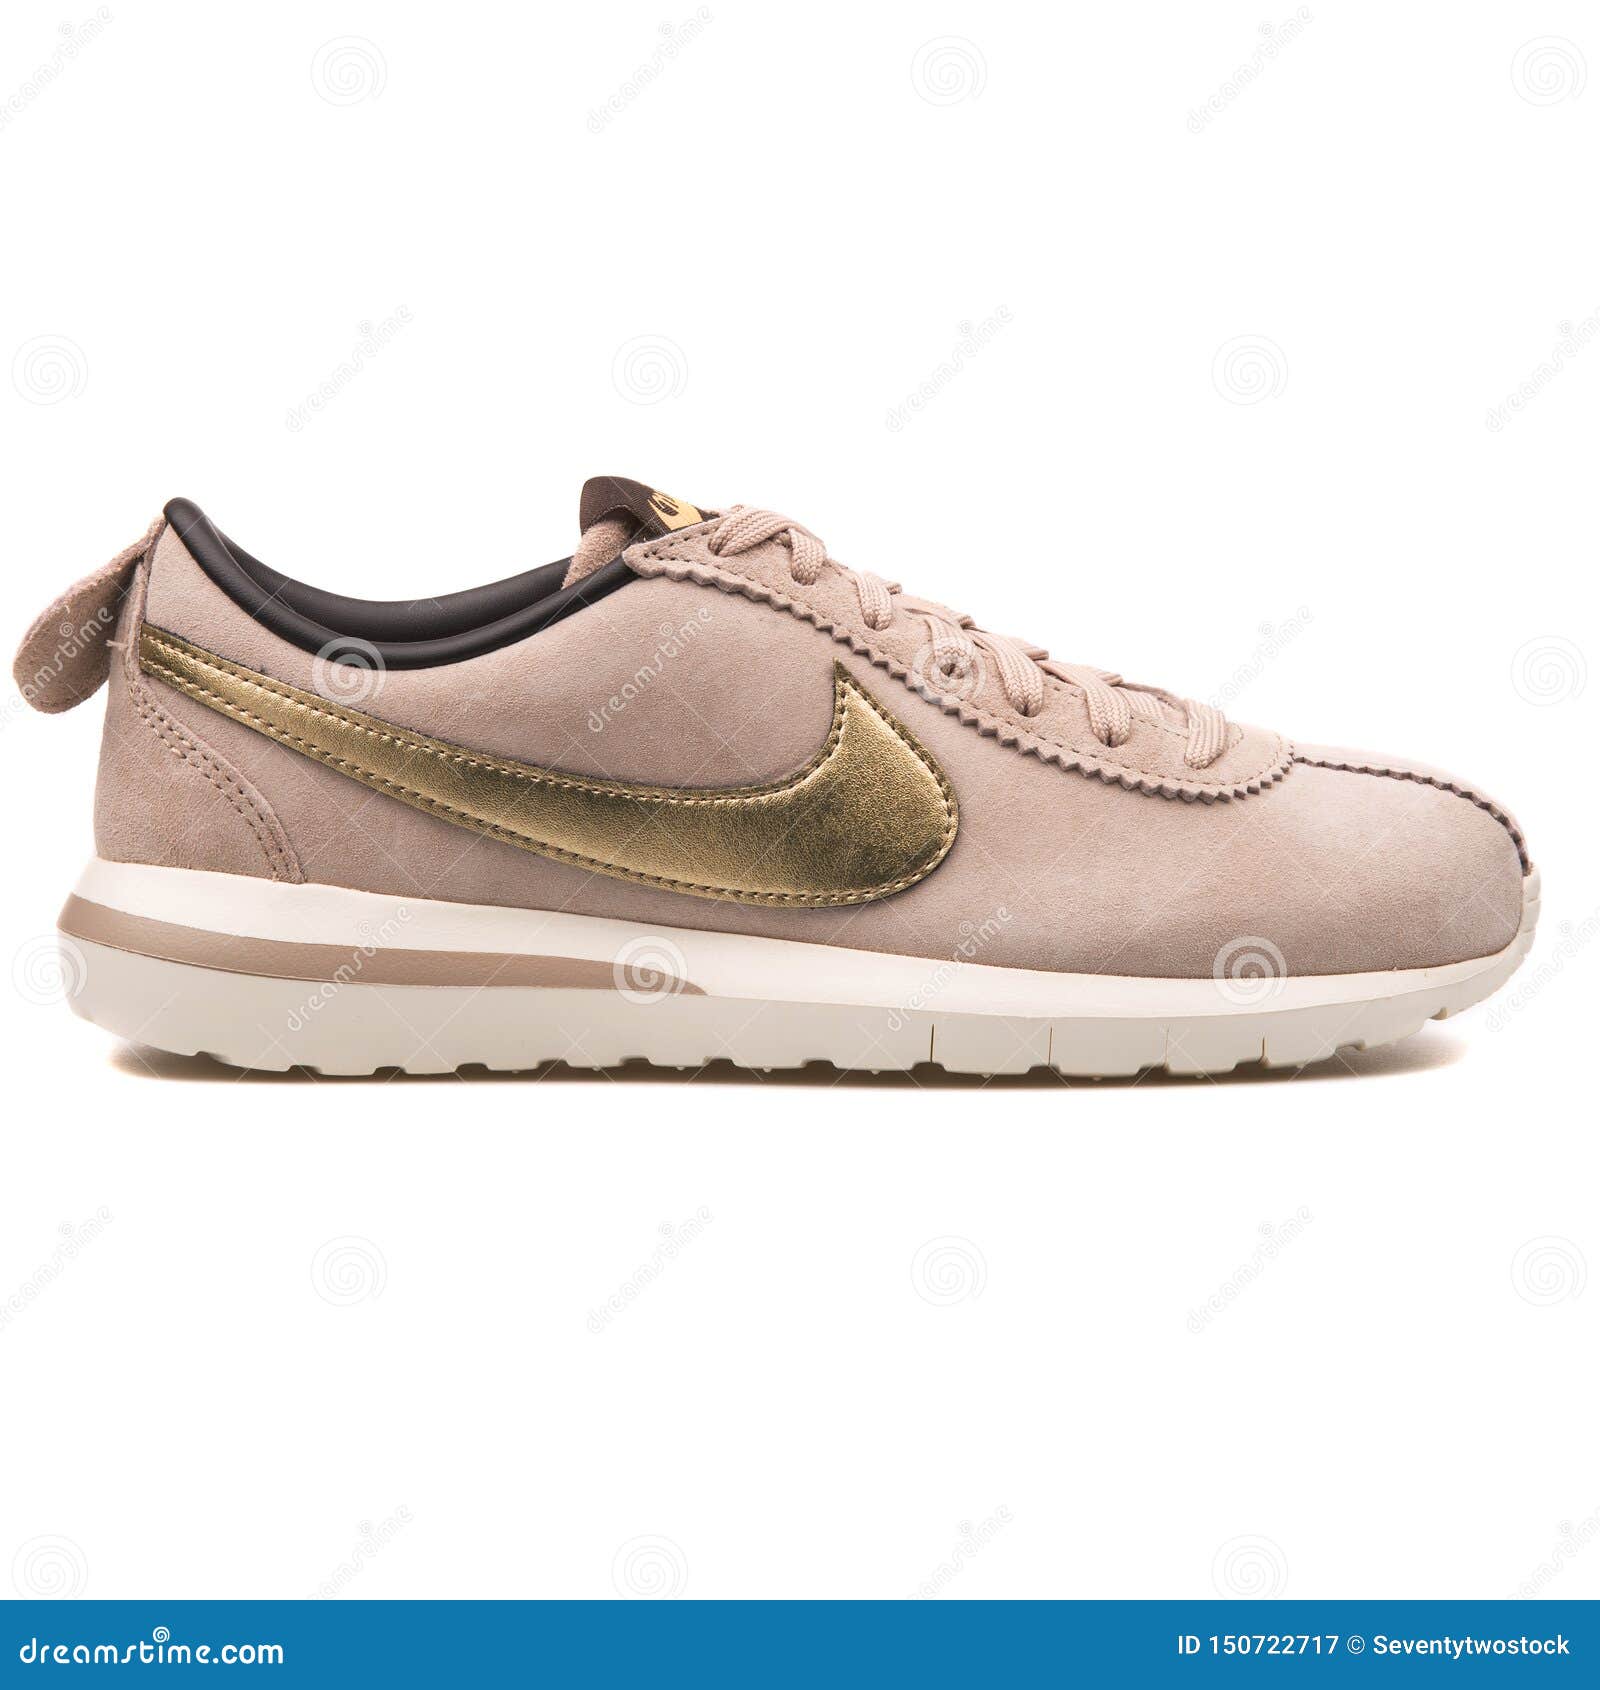 Nike Roshe Cortez NM Premium Suede and Gold Sneaker Editorial Photography - Image of background: 150722717